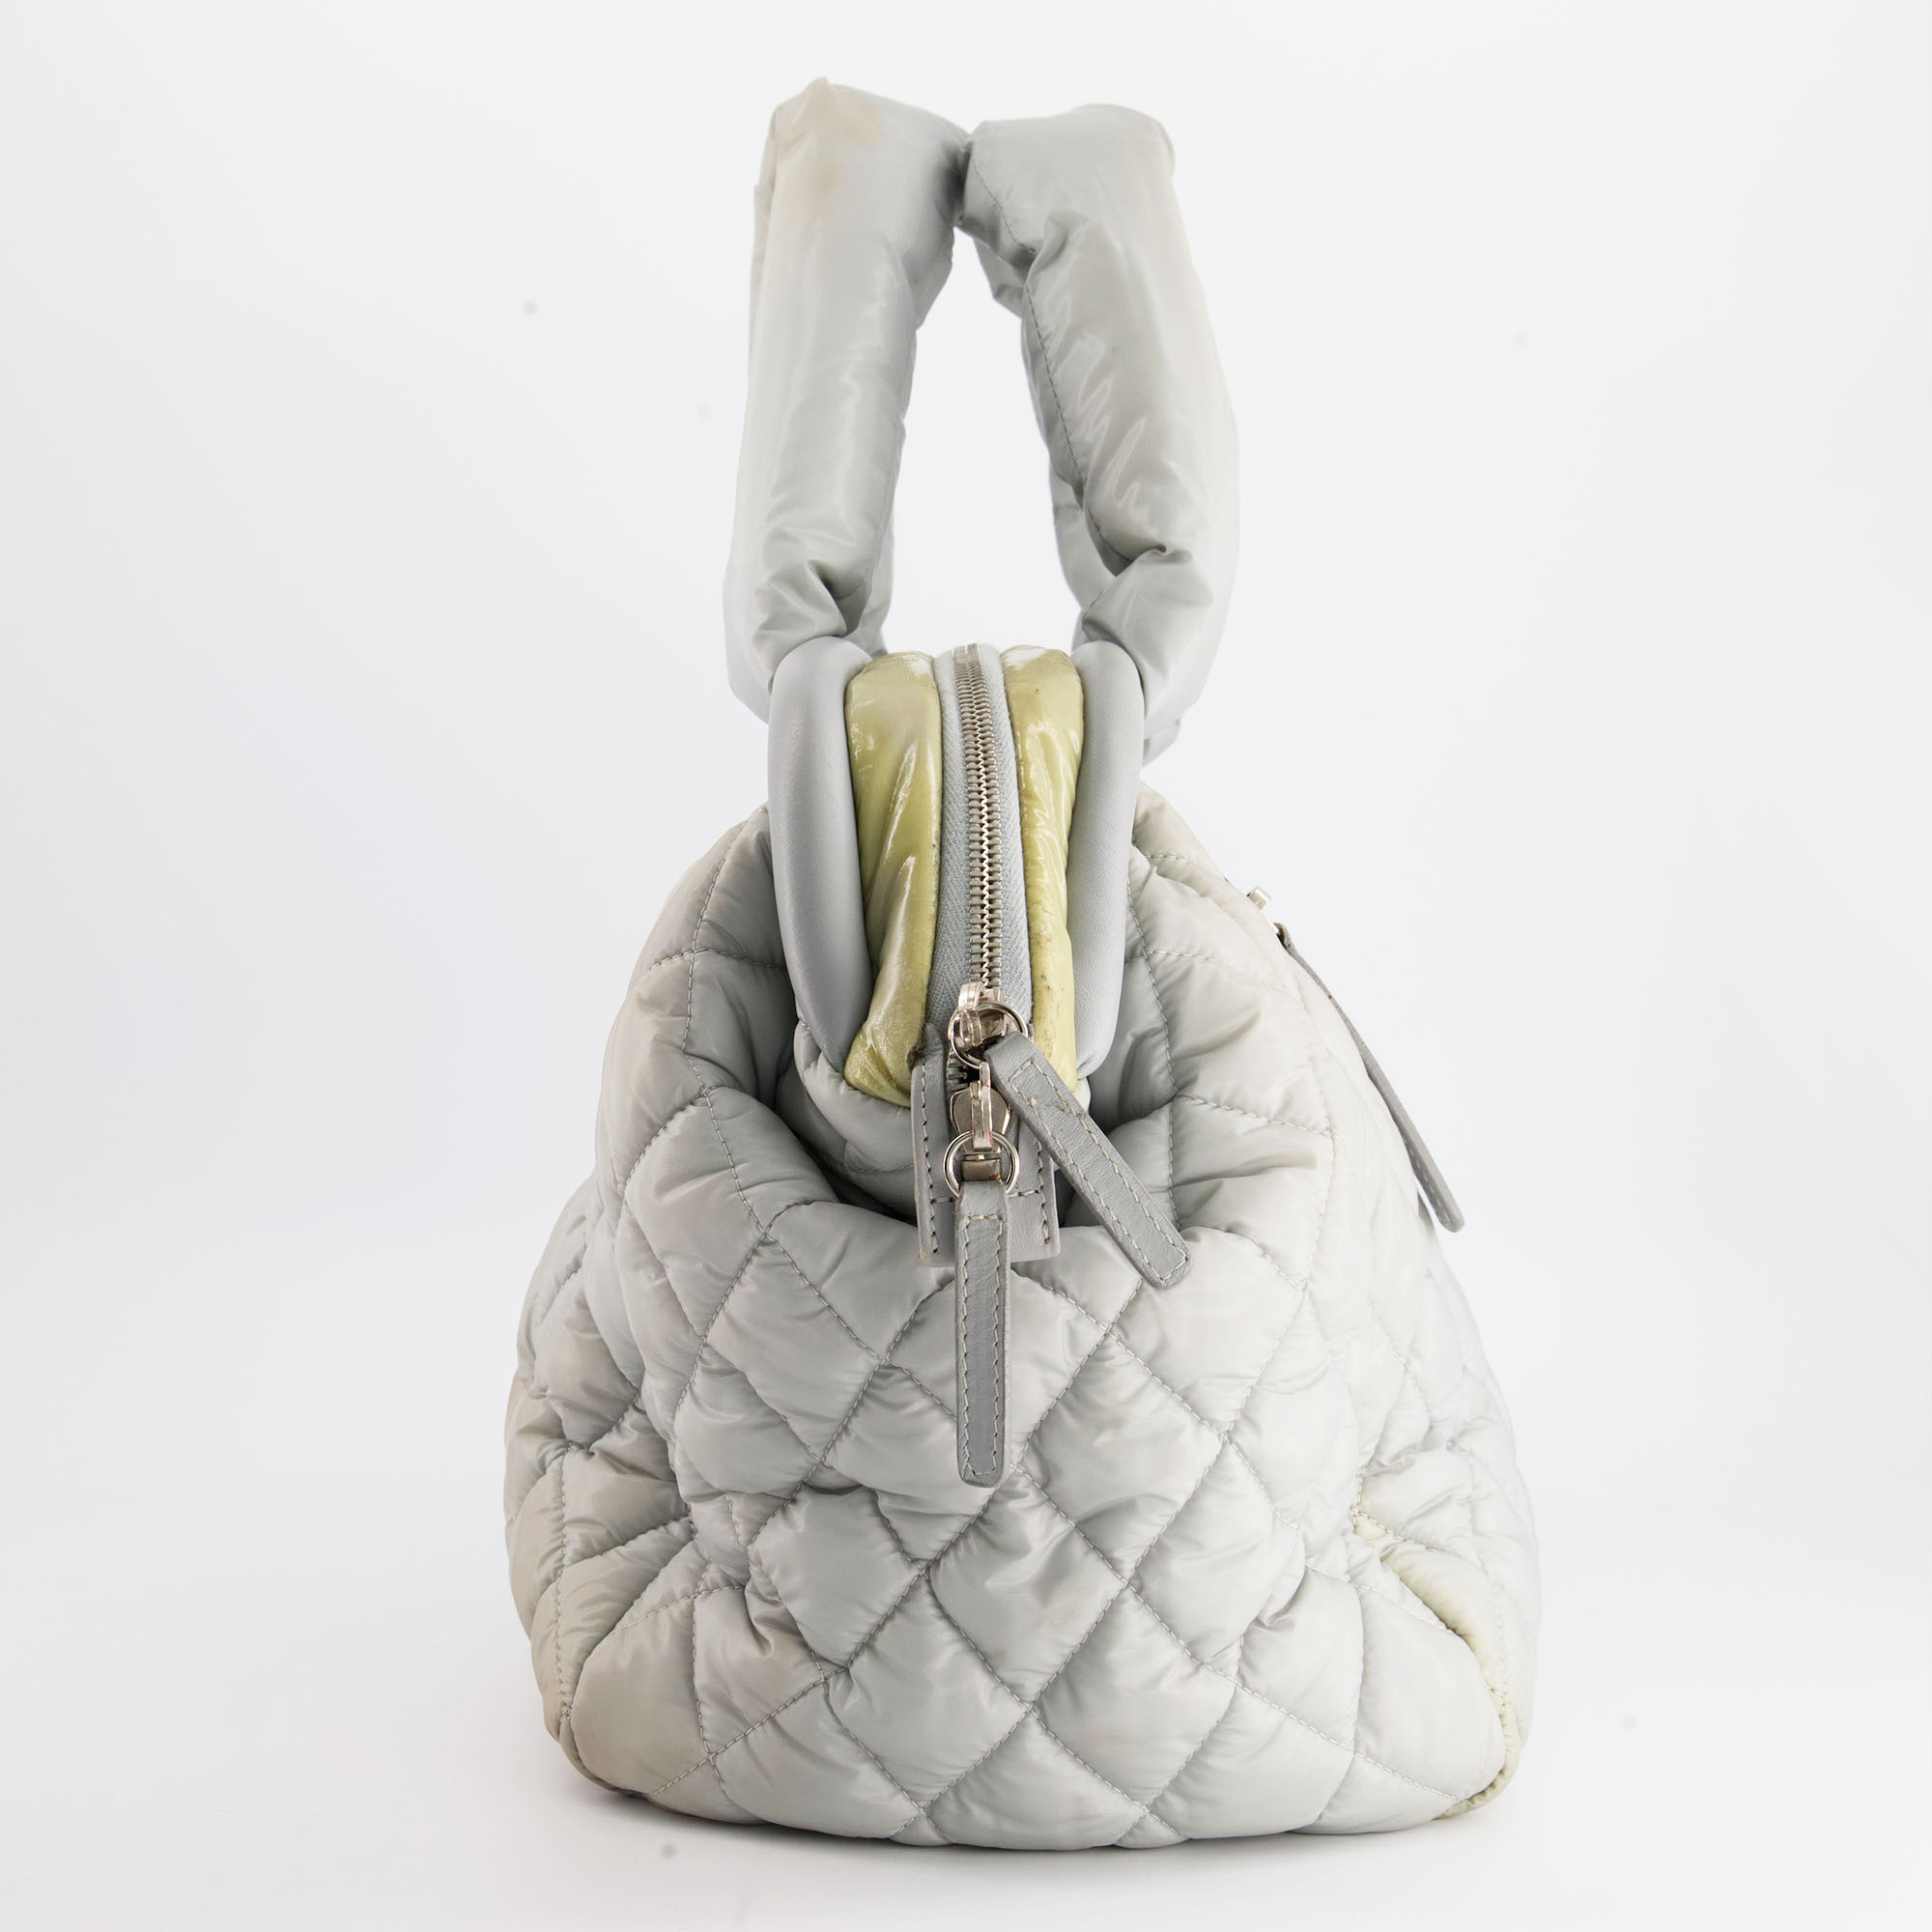 Chanel Cloud Grey Coco Cocoon Tote Bag In Nylon And CC Detail